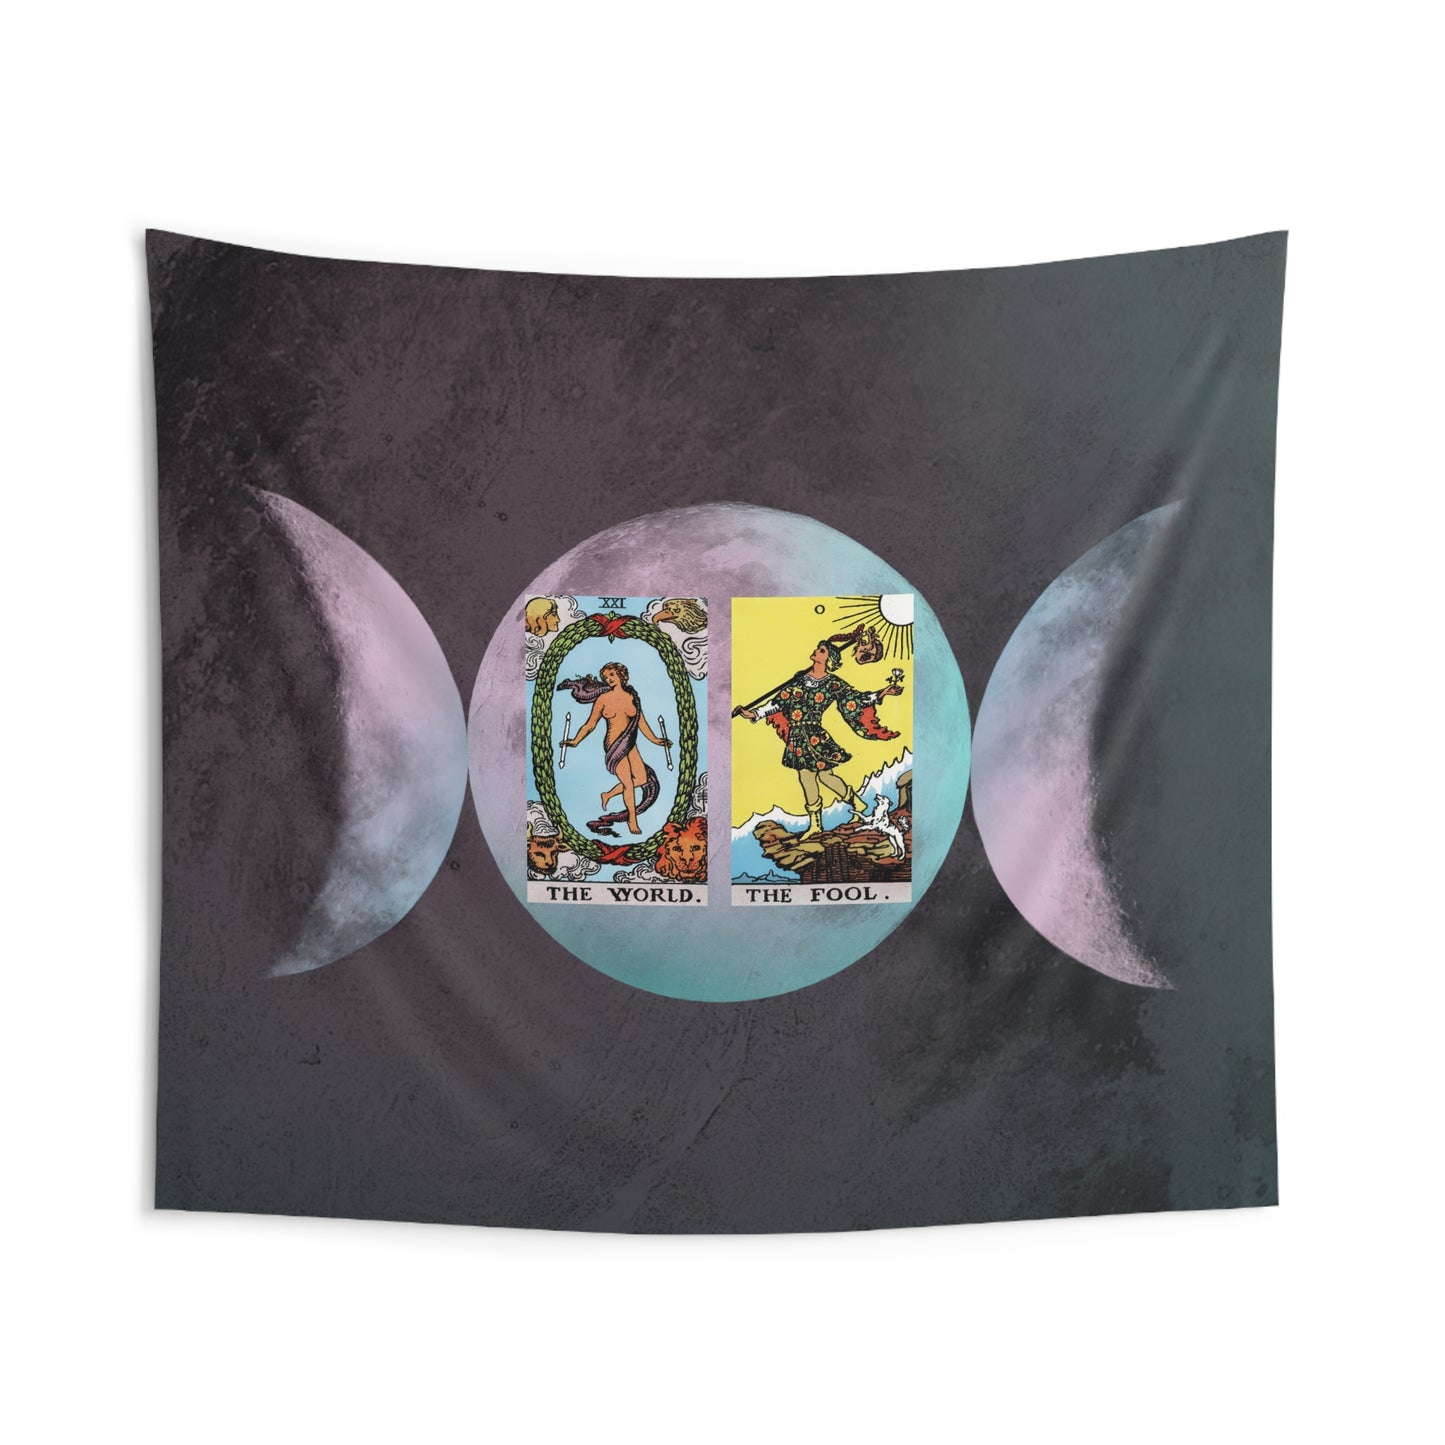 The World AND The Fool Tarot Cards Altar Cloth or Tapestry with Triple Goddess Symbol